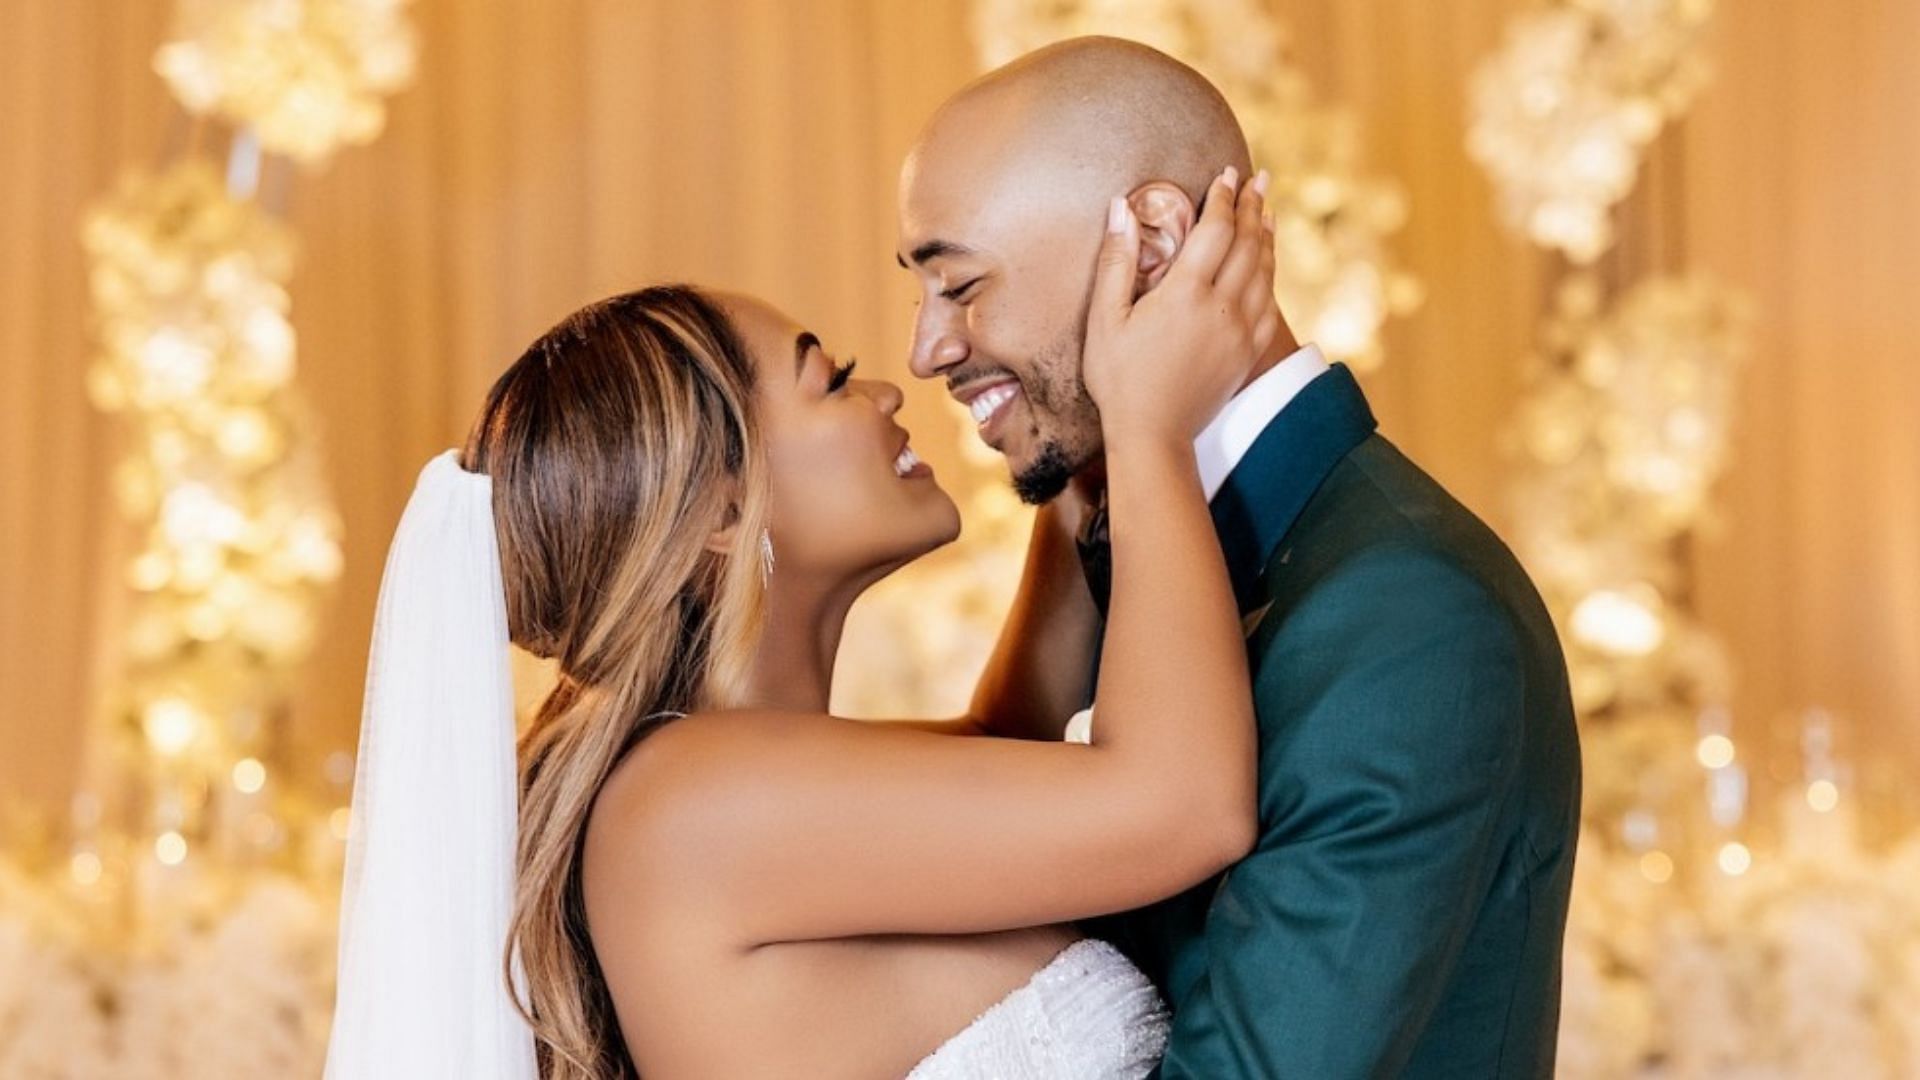 Mookie Betts and the love he shares with his wife, Brianna Hammonds.